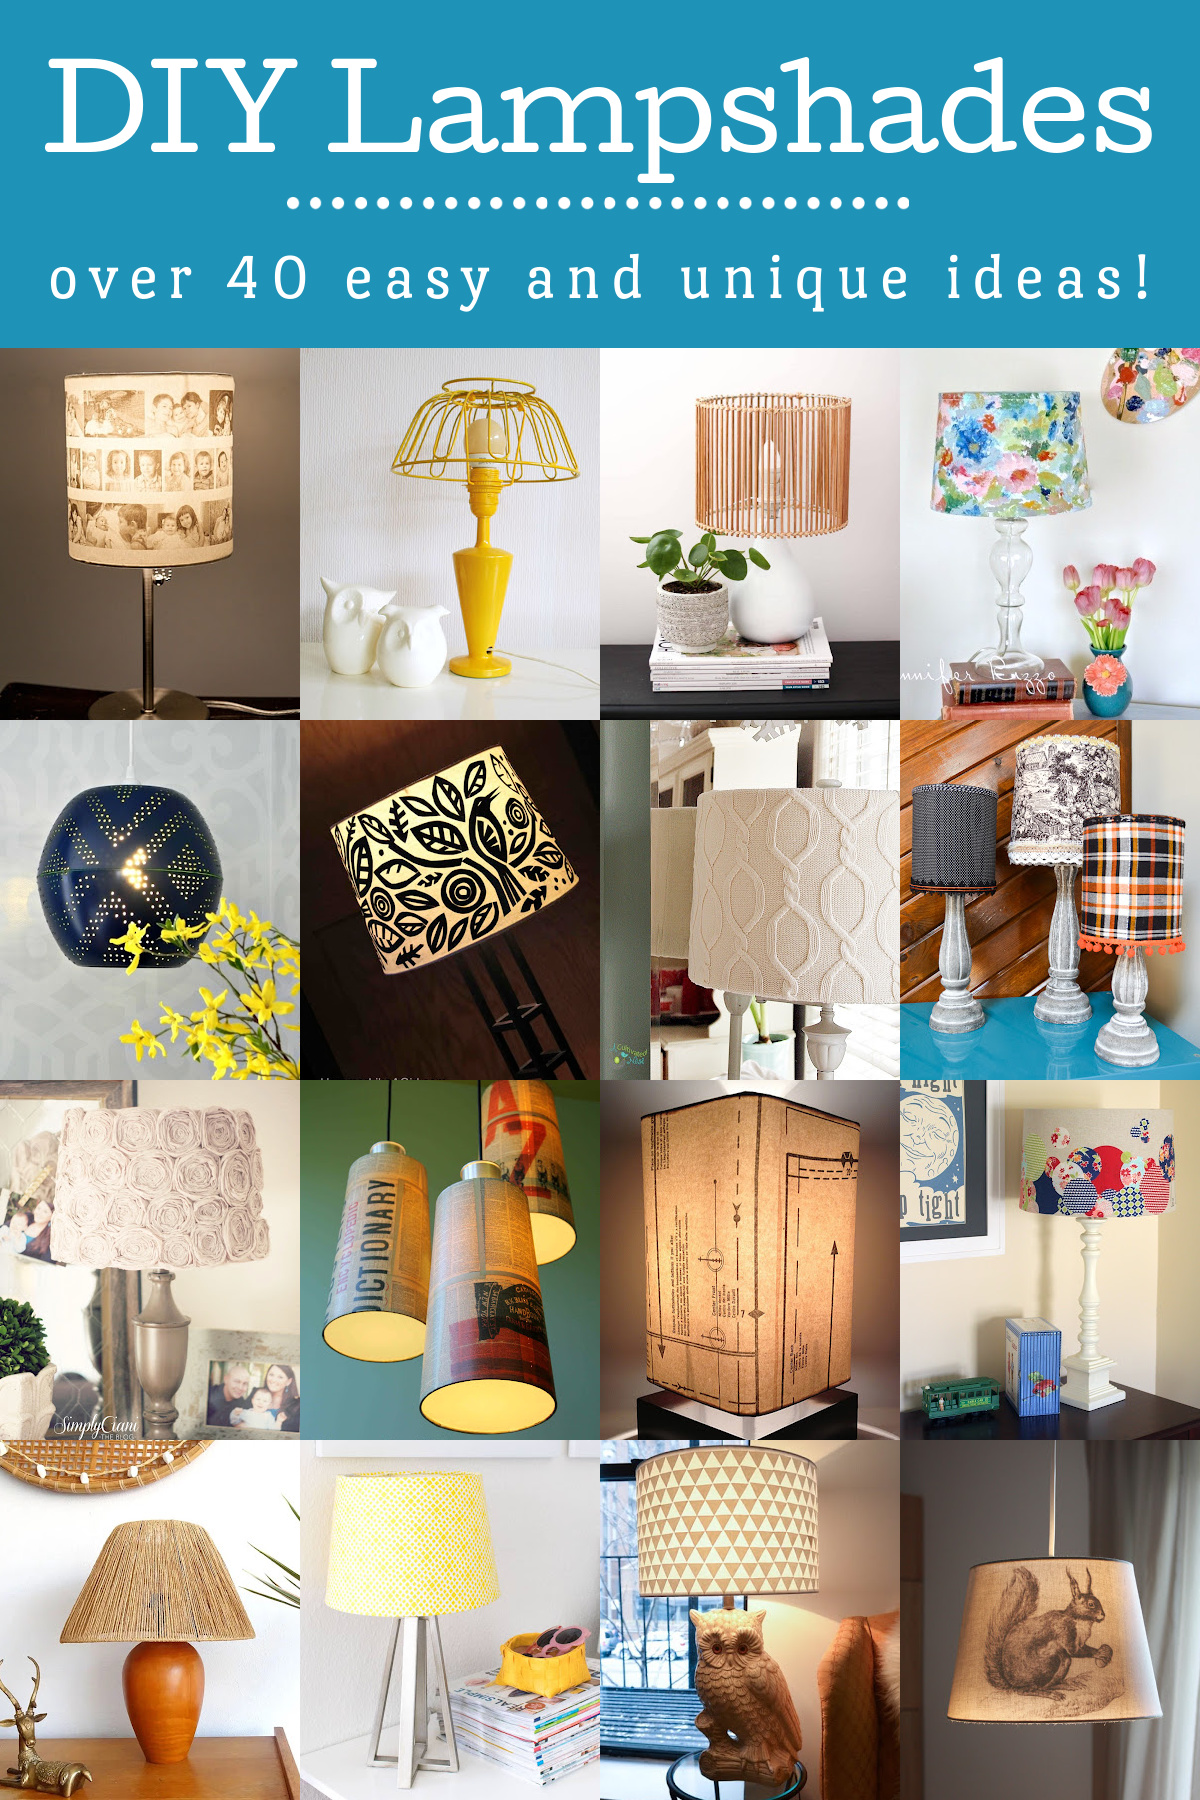 DIY Lampshades for Home Decor